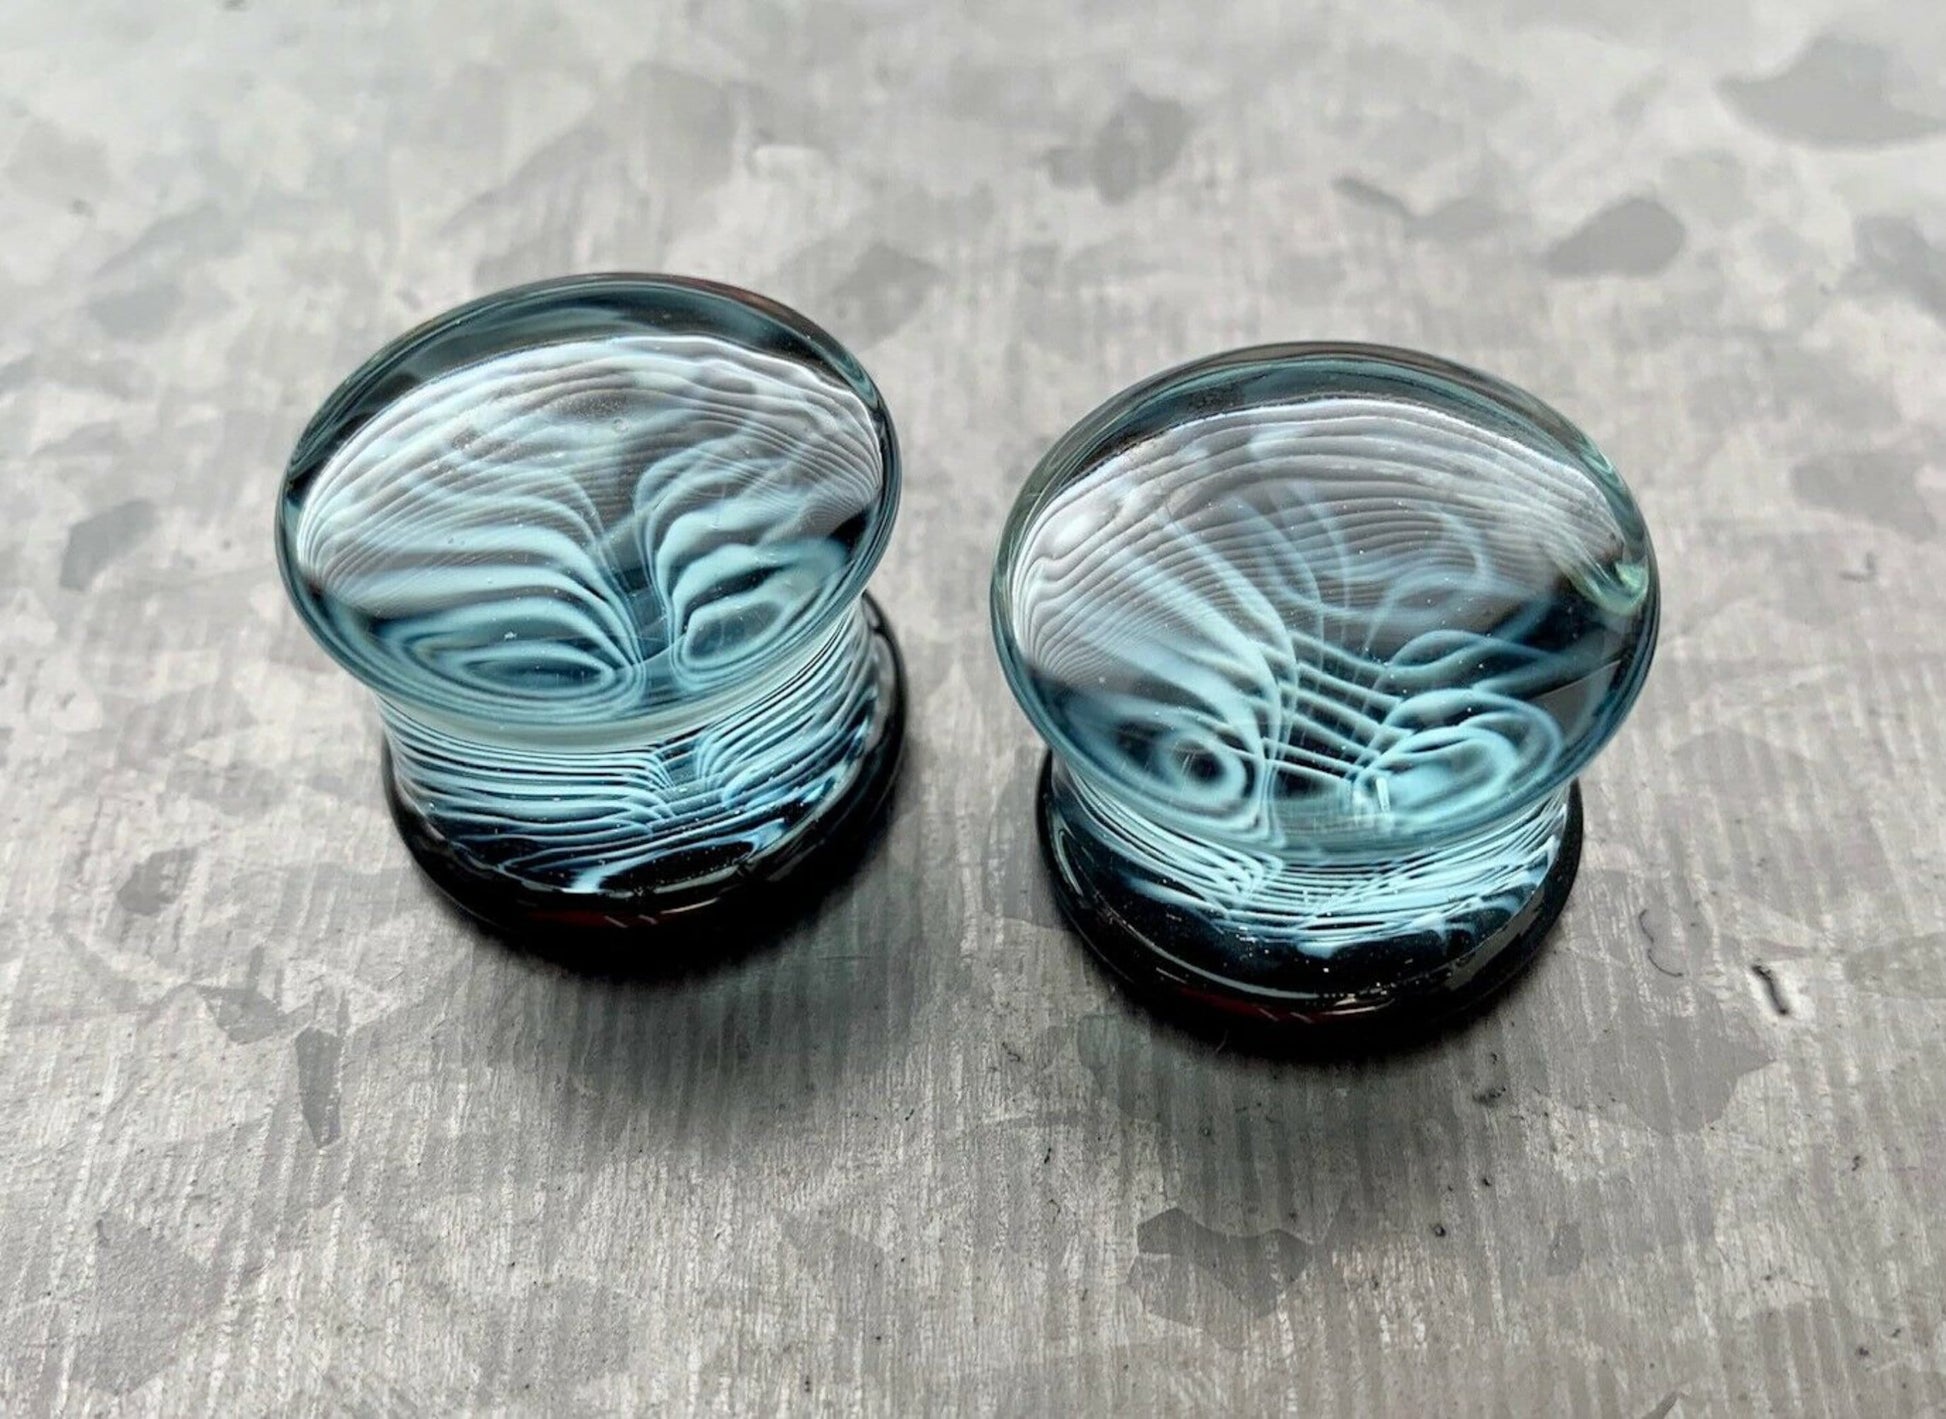 PAIR of Unique Black & White Design Pyrex Glass Double Flare Plugs - Gauges 2g (6mm) through 3/4" (19mm) available!19mm) available!